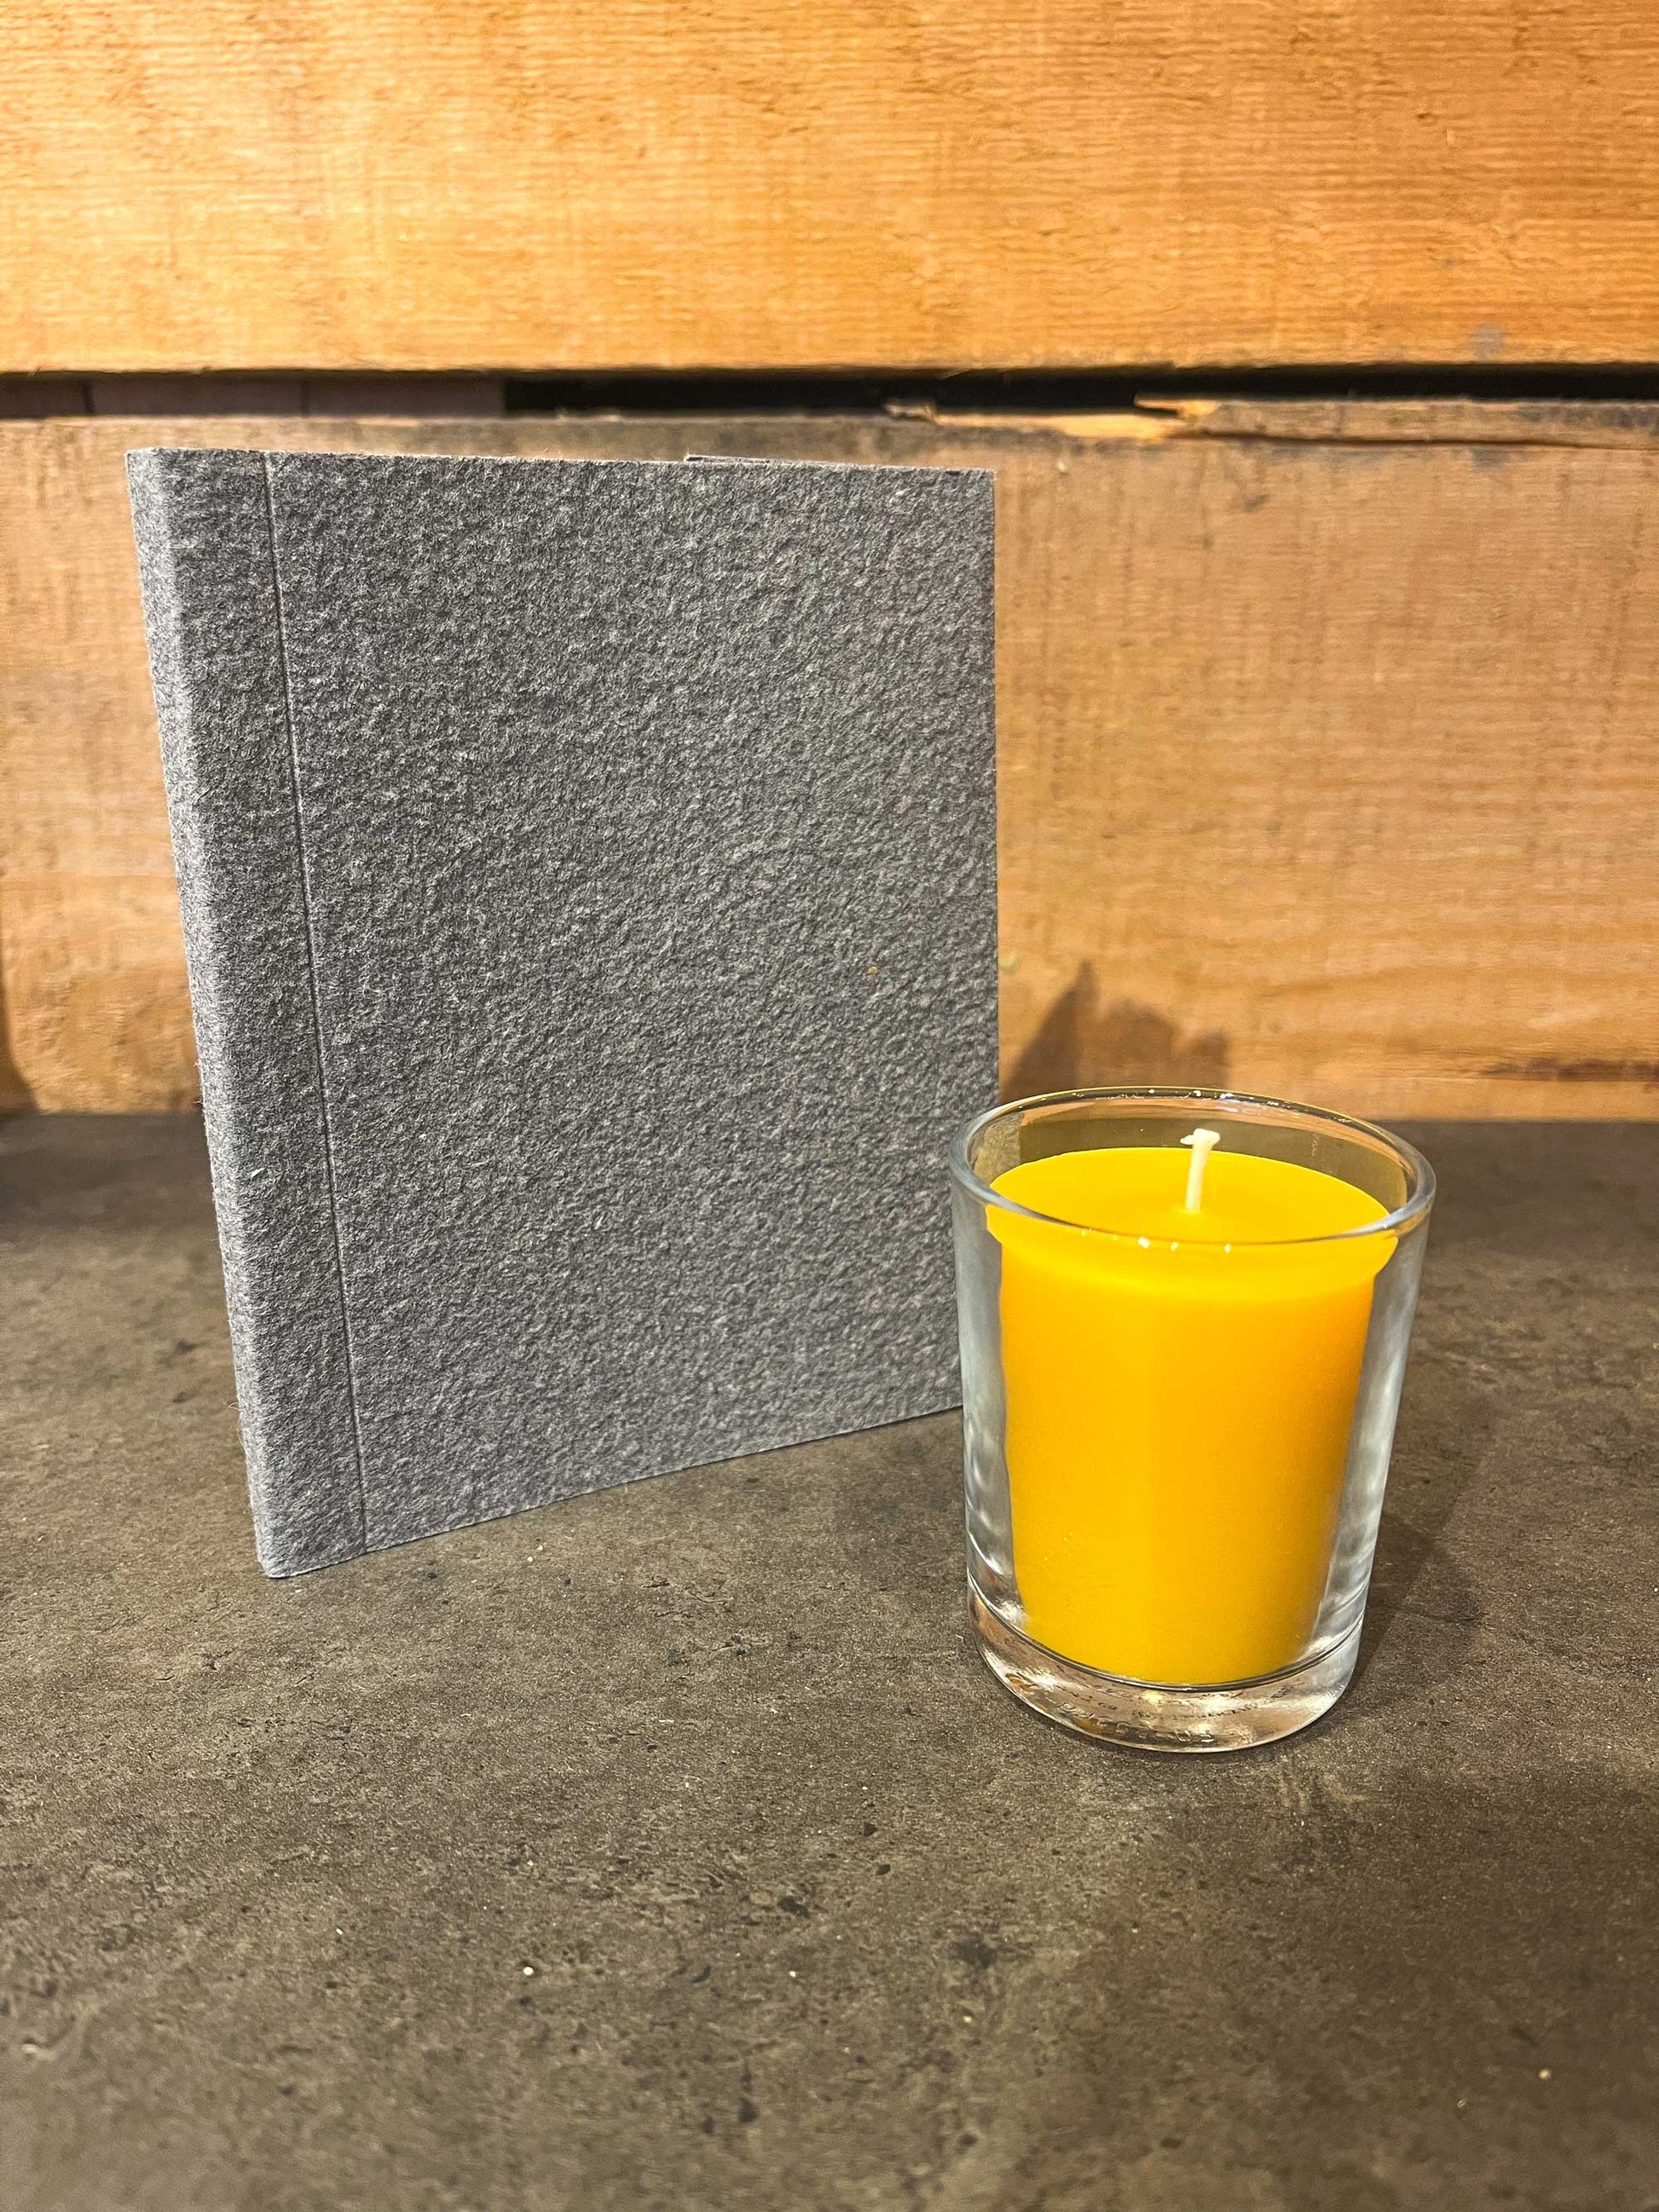 Handmade beeswax votive candle in glass cup next to blue eco-friendly notebook